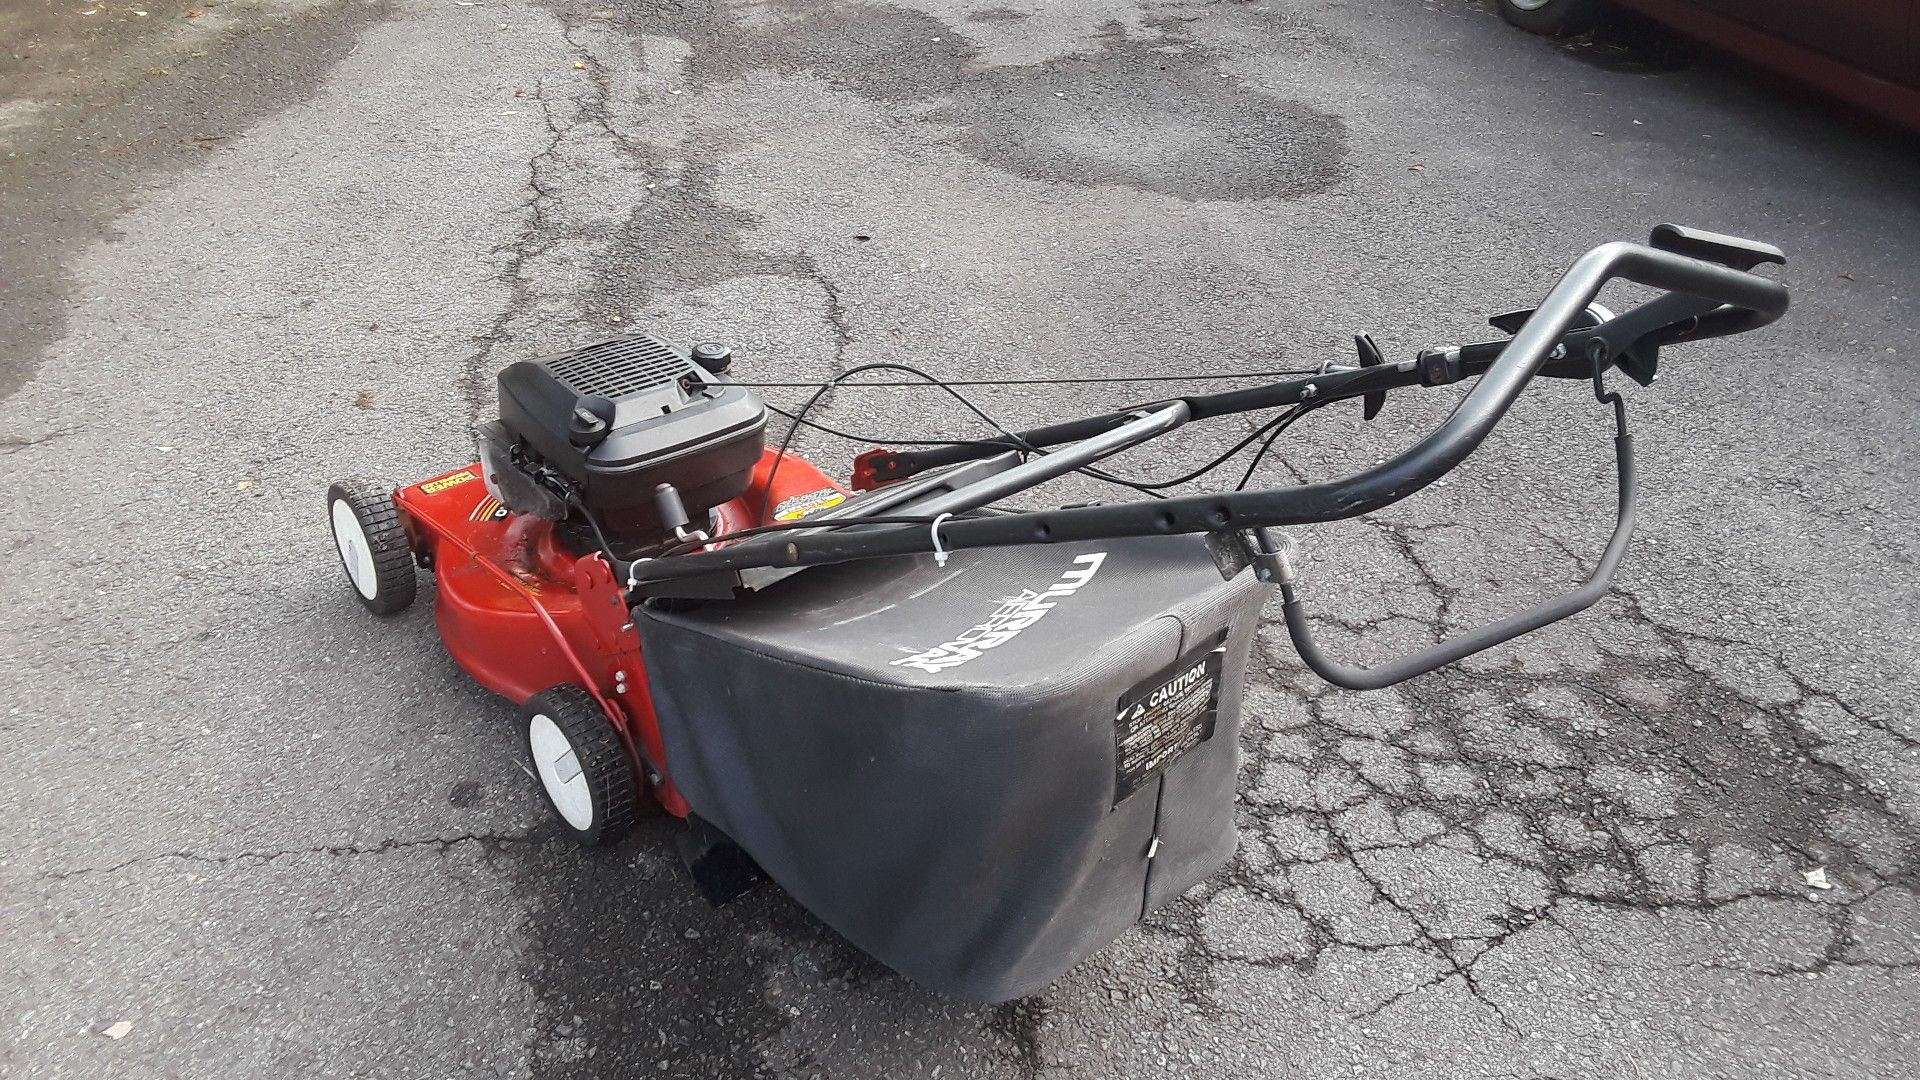 Murray lawn mower 5 horsepower completely serviced new cutting blade for a bagger Onsen snow asking $110